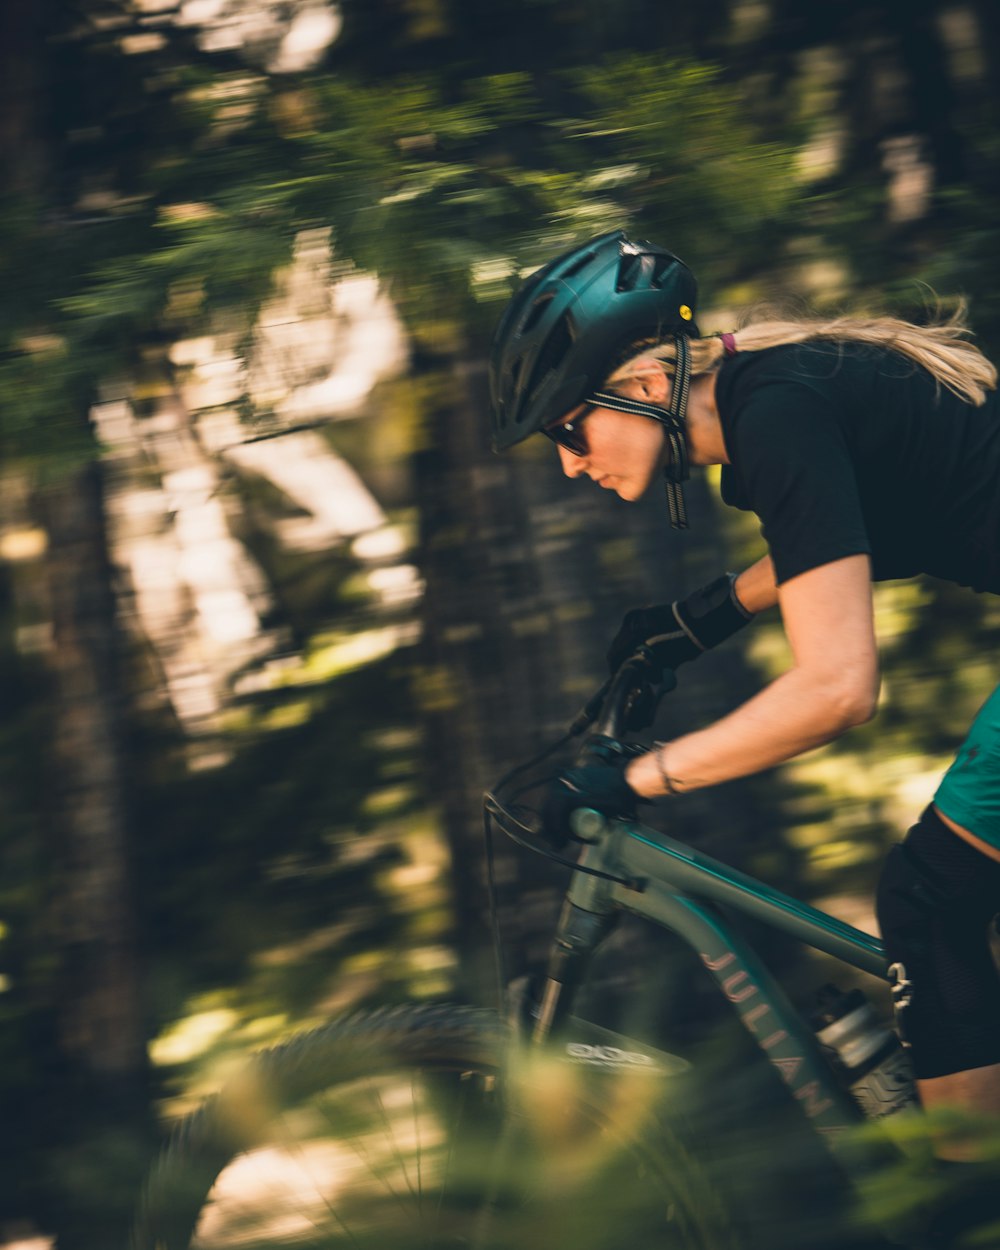 Woman rides a women-specific Juliana mountain bike through the forest